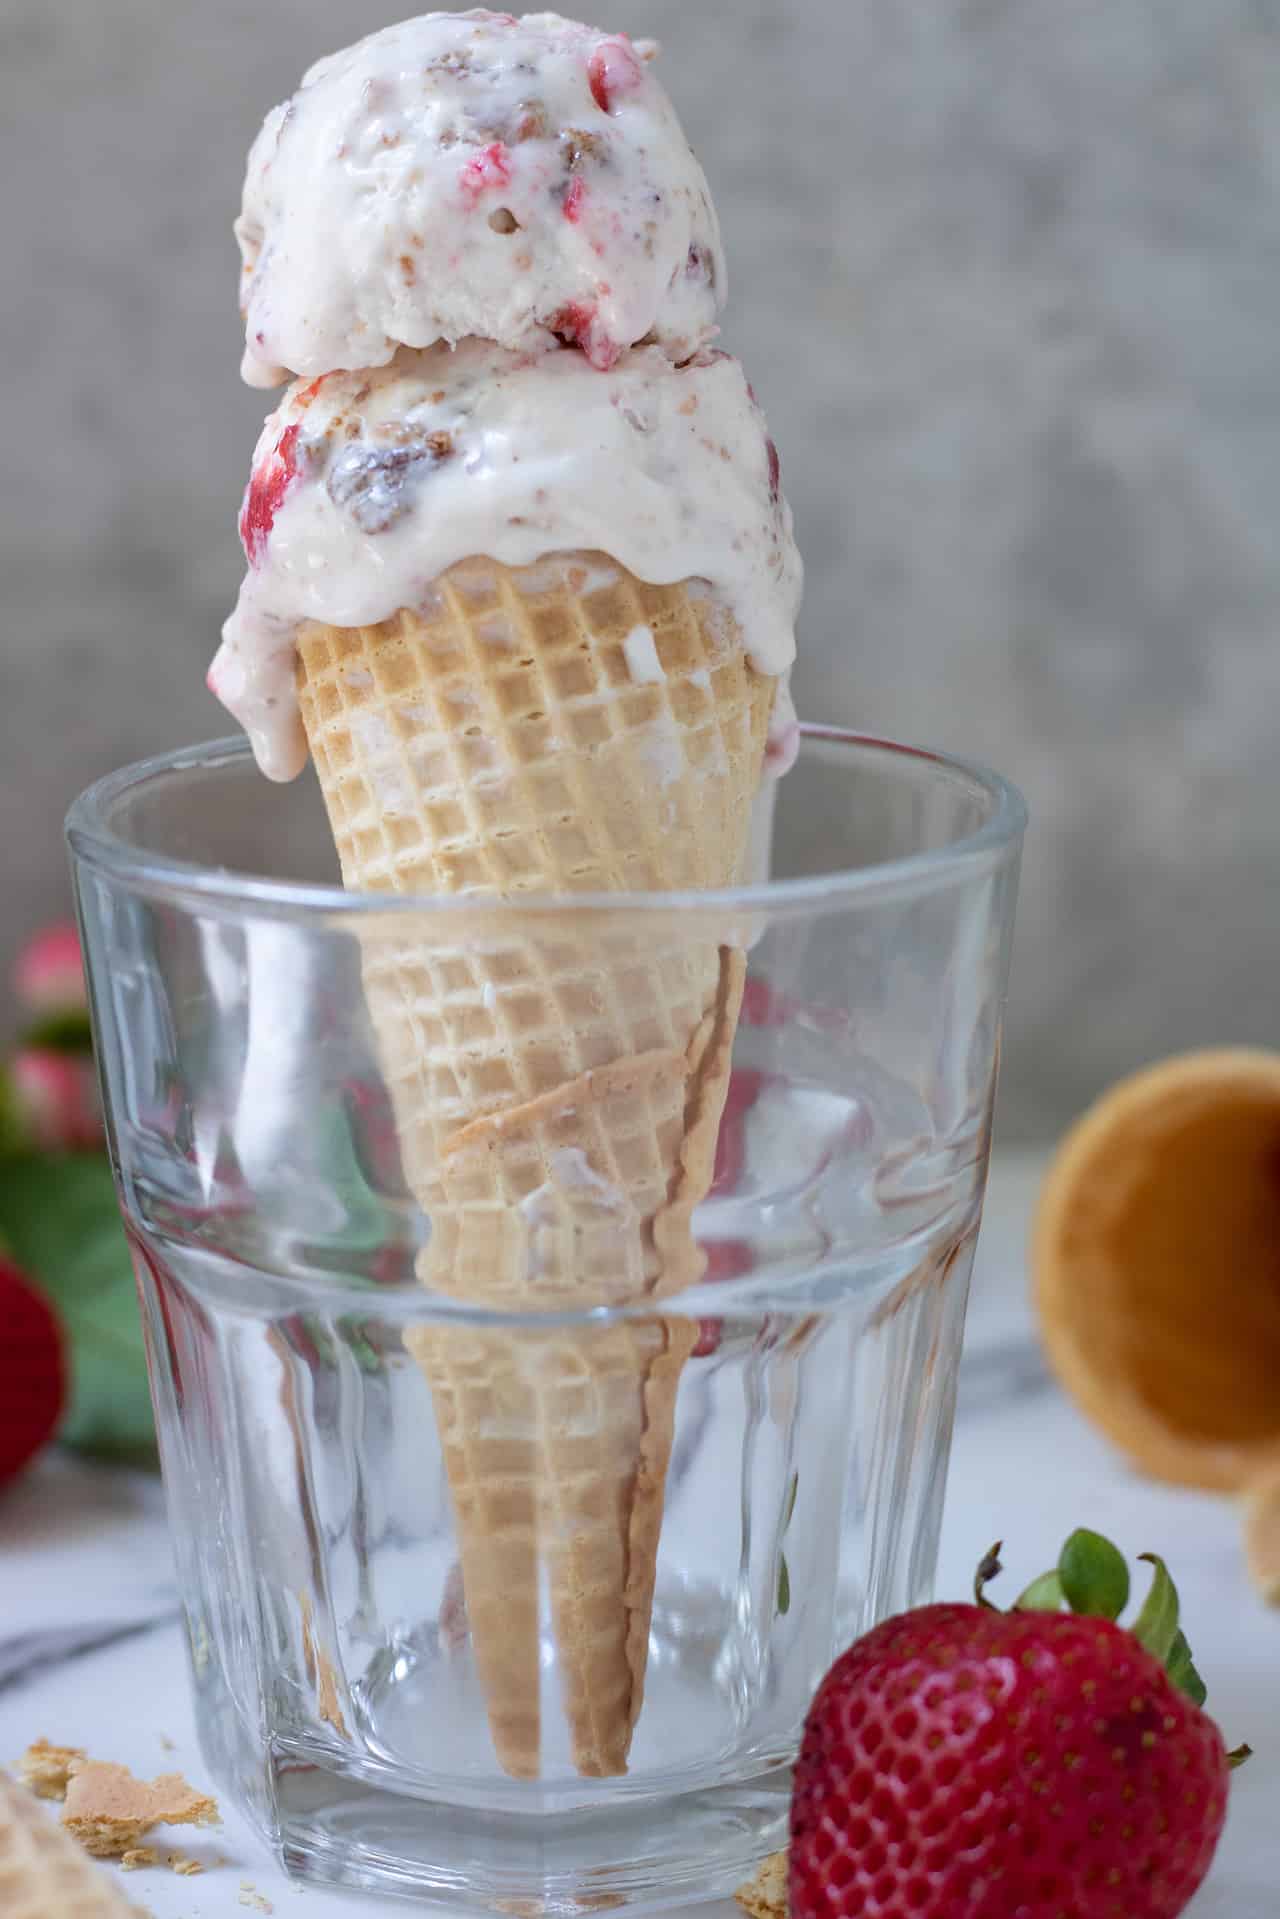 A short glass with an ice cream cone in it. There's ice cream dripping down the sides. you can see more ice cream cones and a strawberry in the background